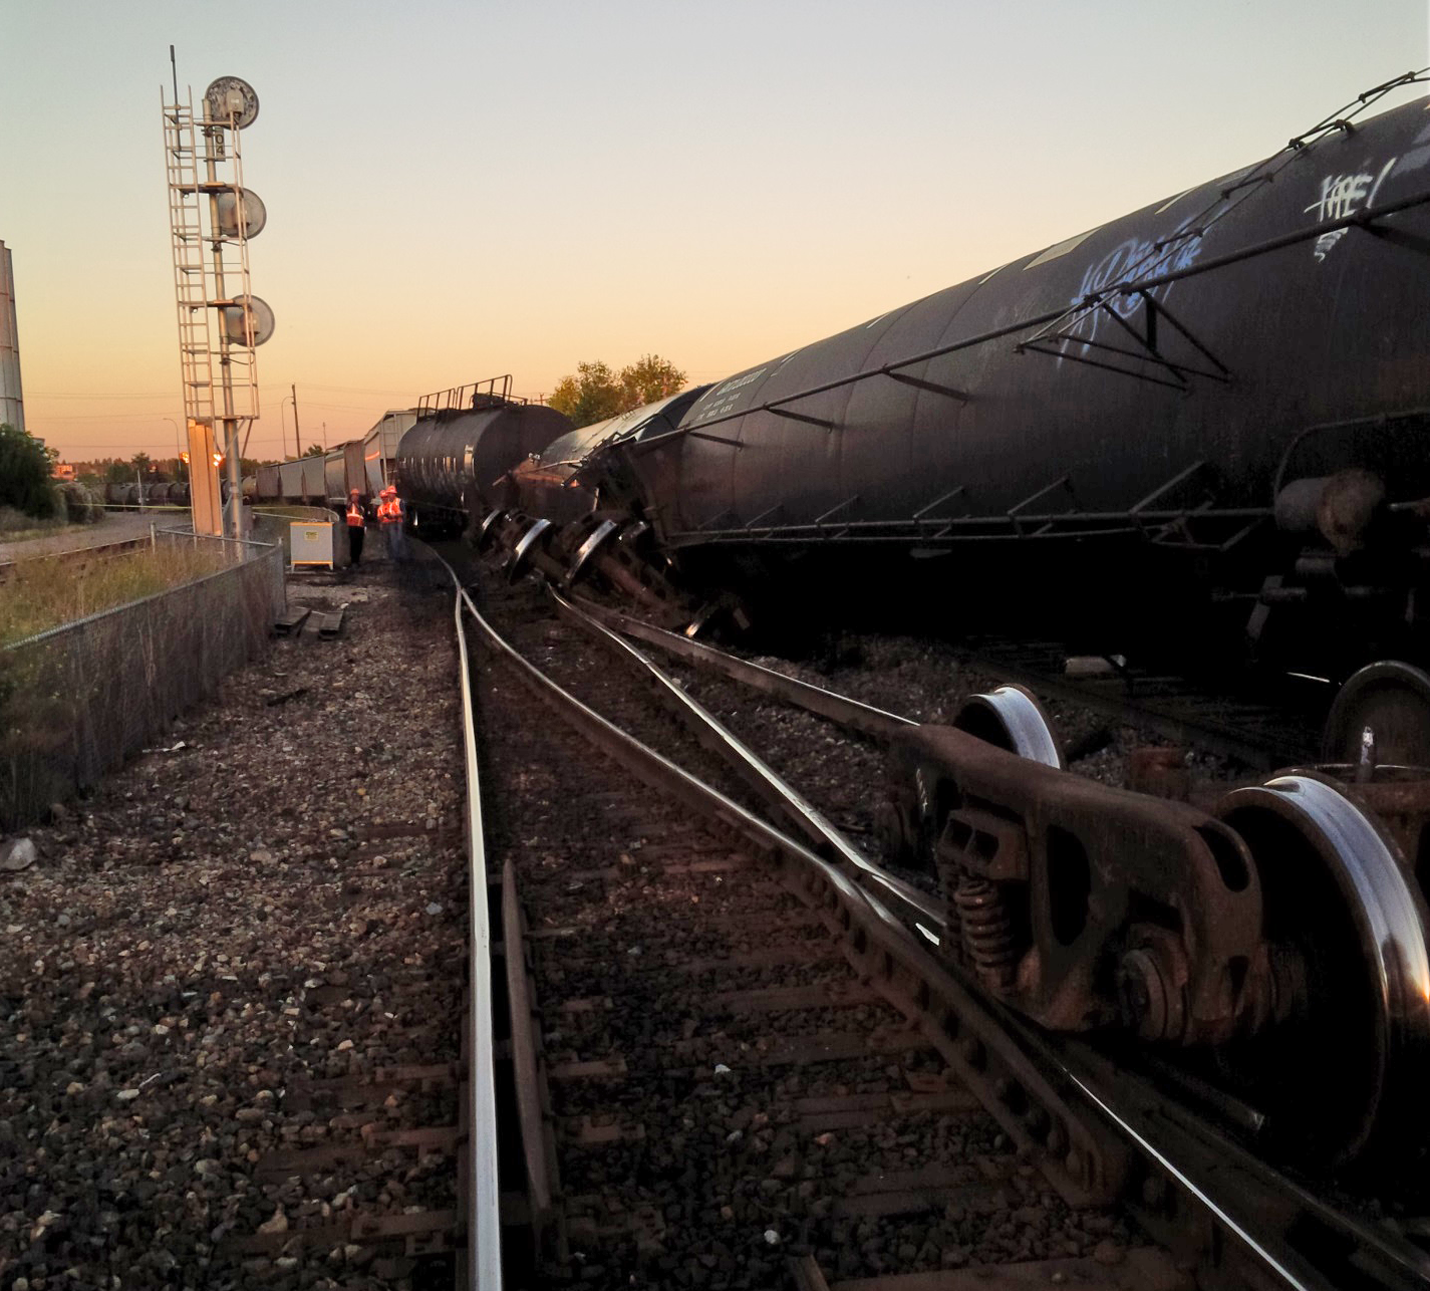 Another view of the rail tanker cars at the occurrence site